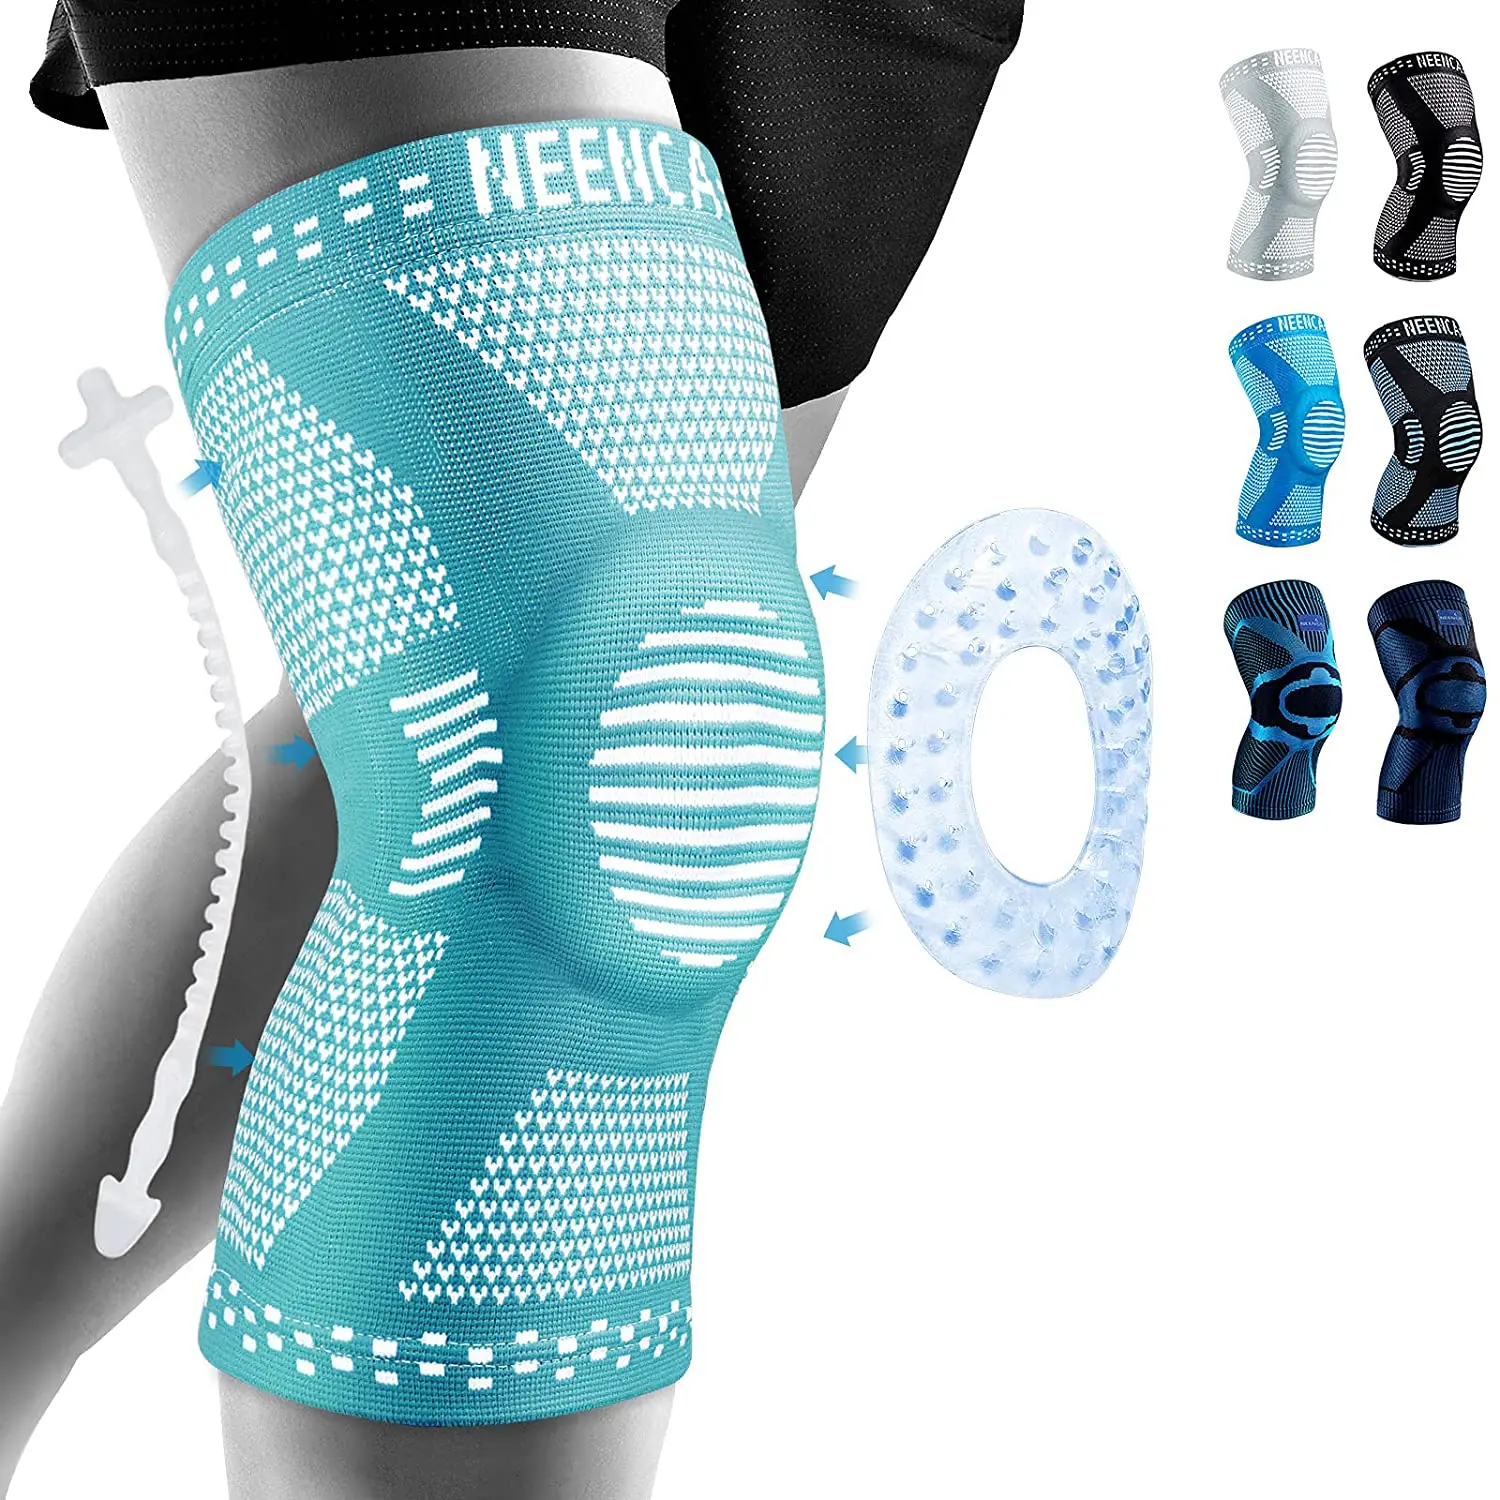 https://ae01.alicdn.com/kf/Sc2a3d2d5b46d47c08d2b45b6fa17386bT/NEENCA-Knee-Brace-Support-with-Side-Stabilizers-Patella-Gel-Knee-Compression-Sleeve-for-Knee-Pain-Meniscus.jpg